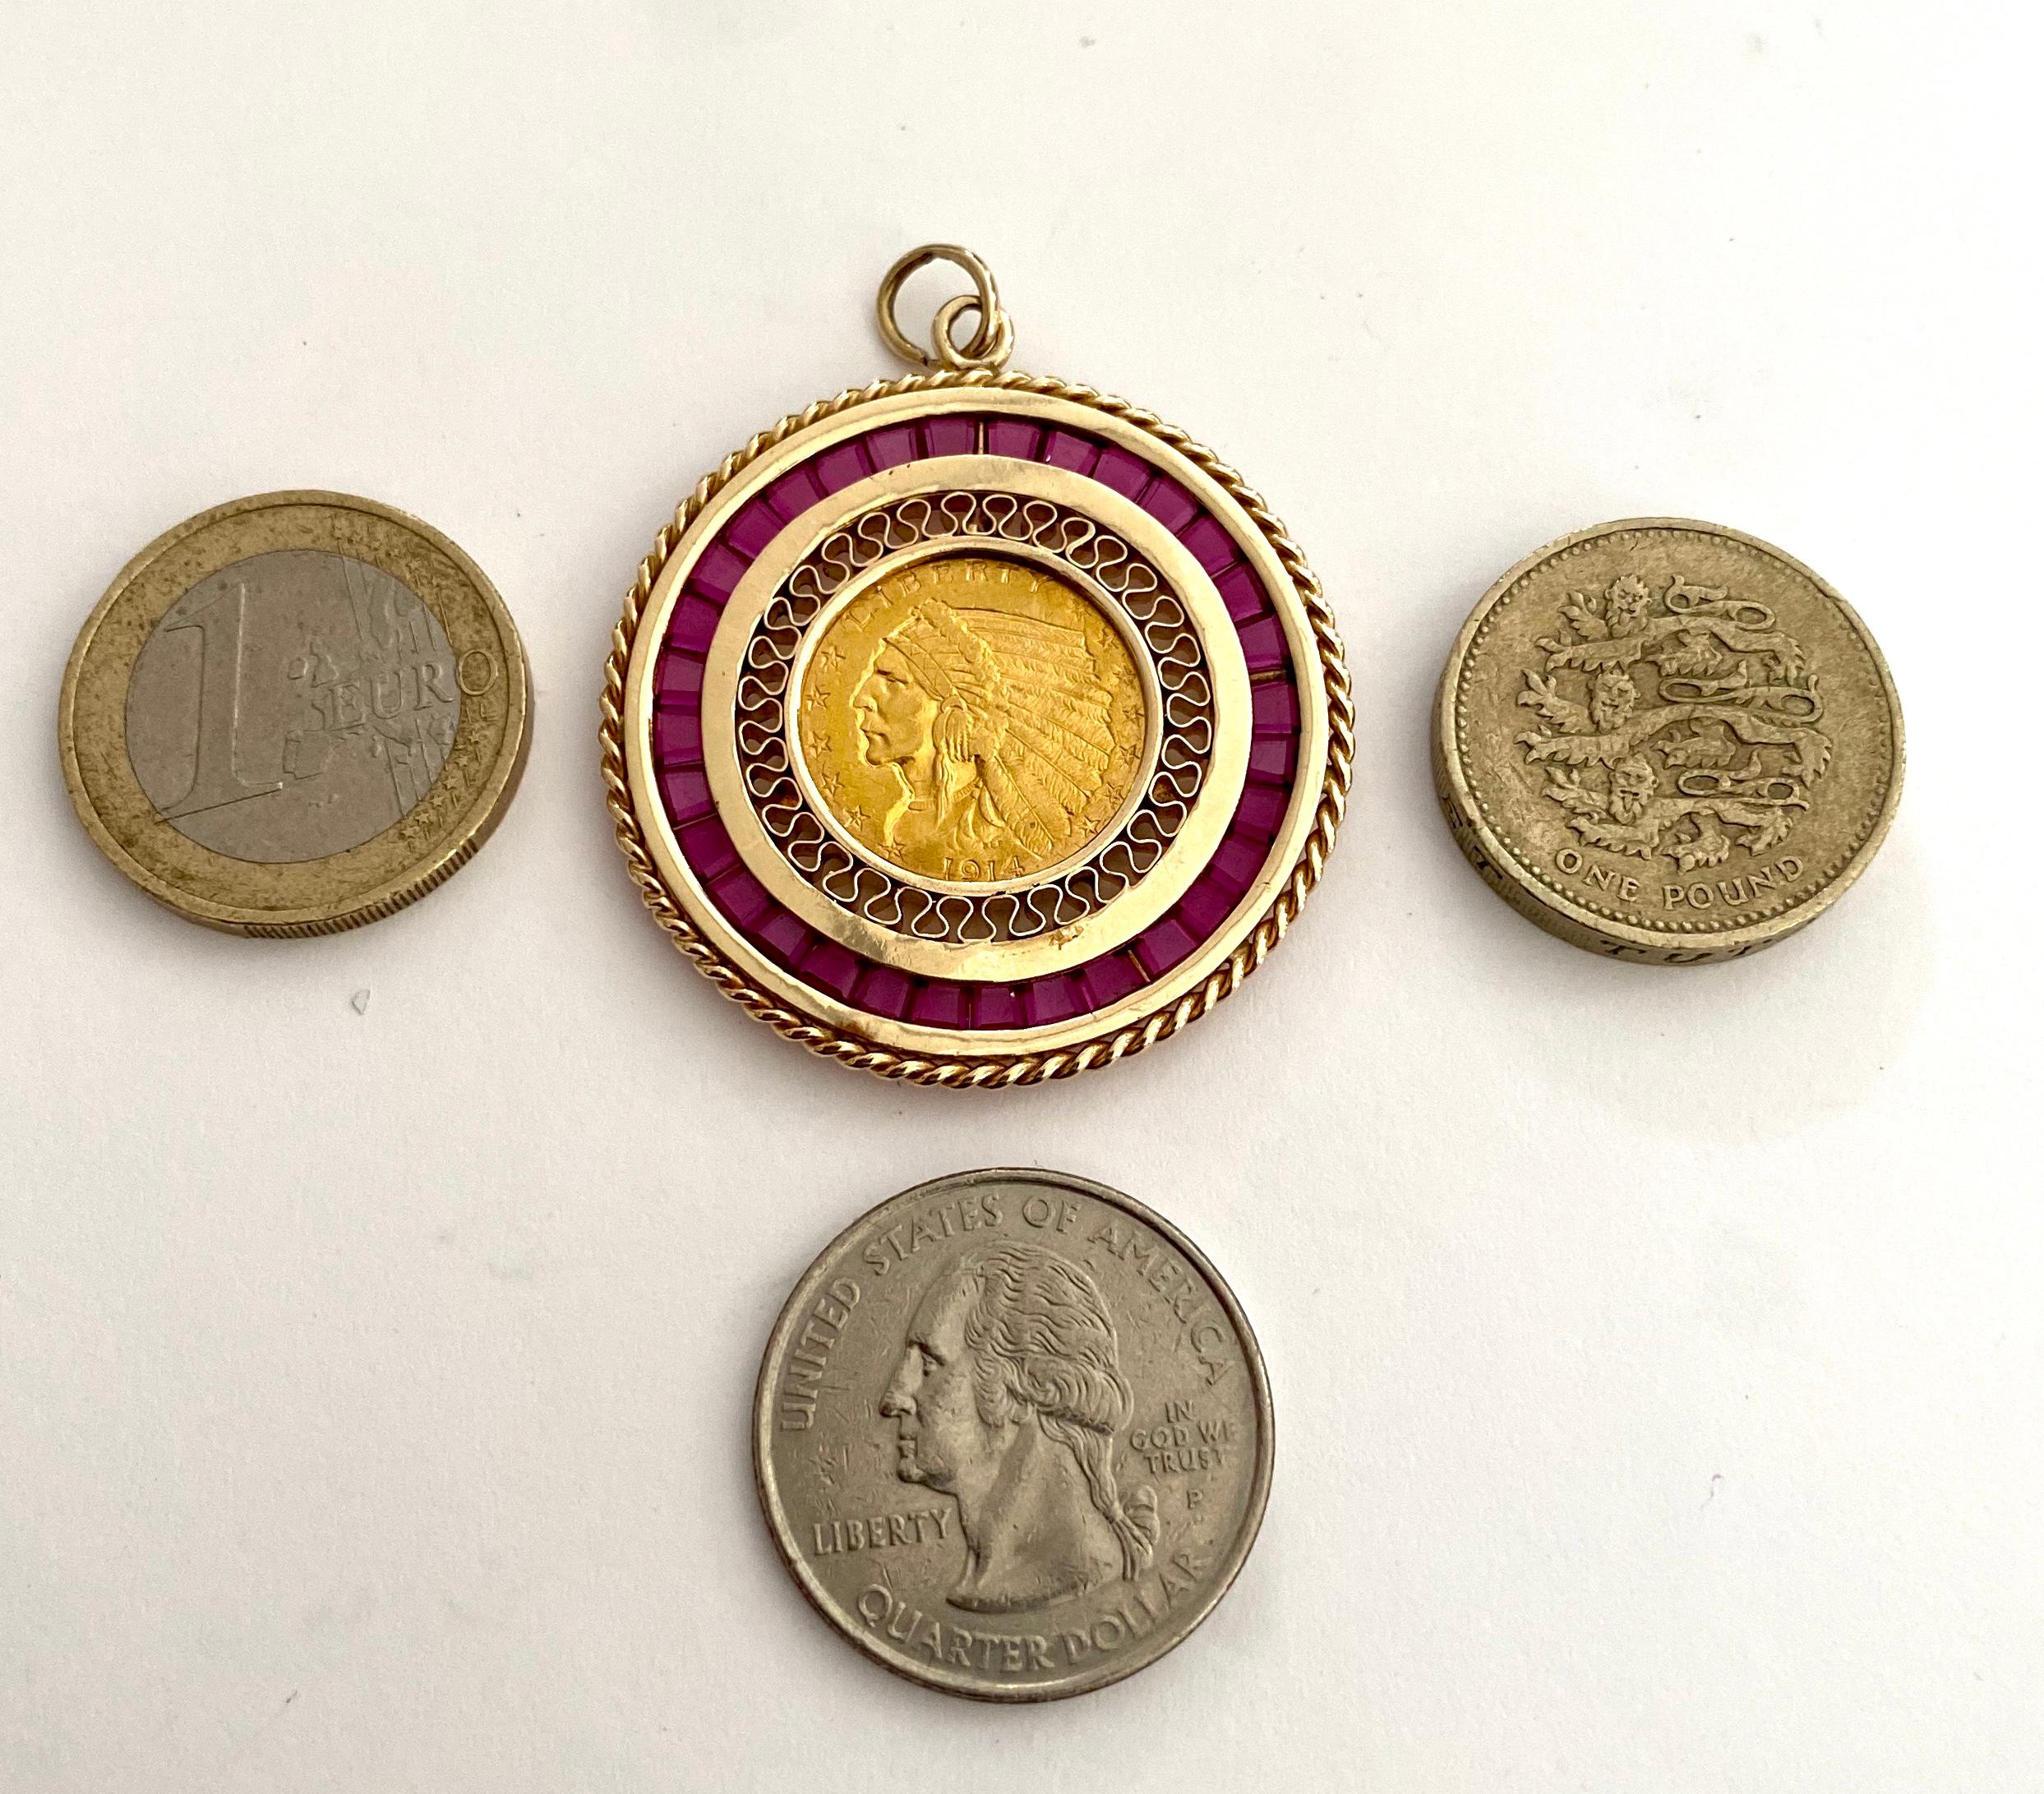 Modernist 10 Karat Yellow Gold Pendant, Set with Synthetic Ruby's and 2 1/2 $ Coin 1914